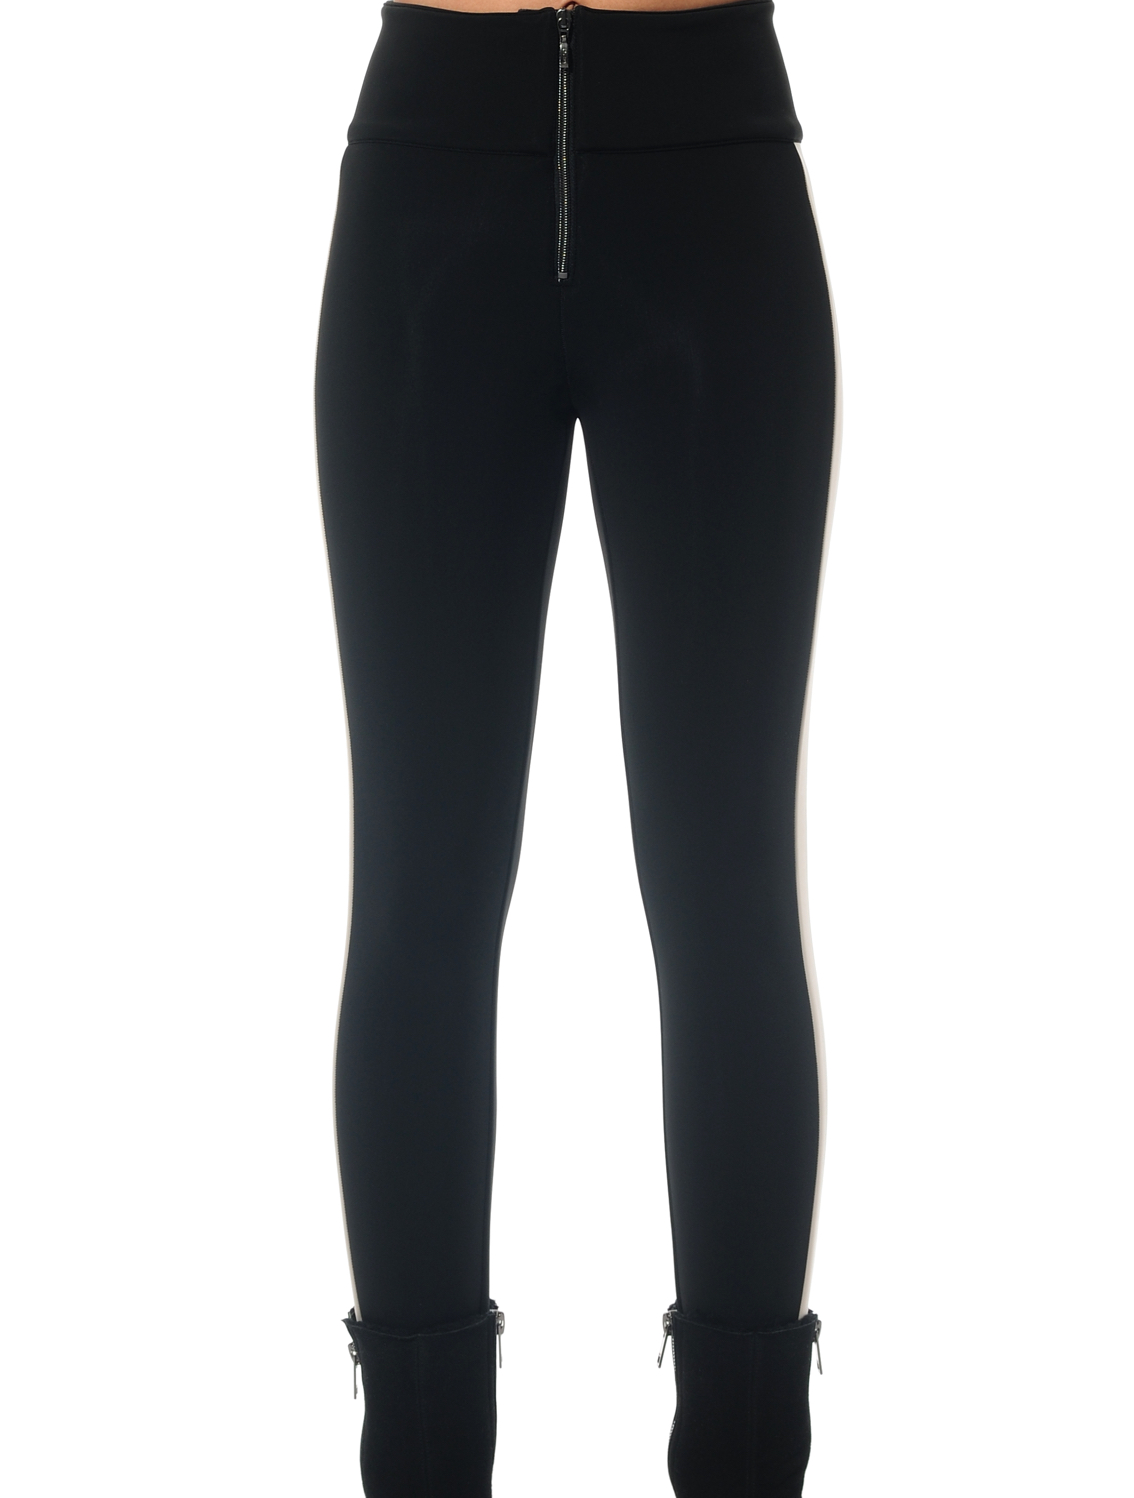 4way stretch in-boot ski pants black/light taupe 